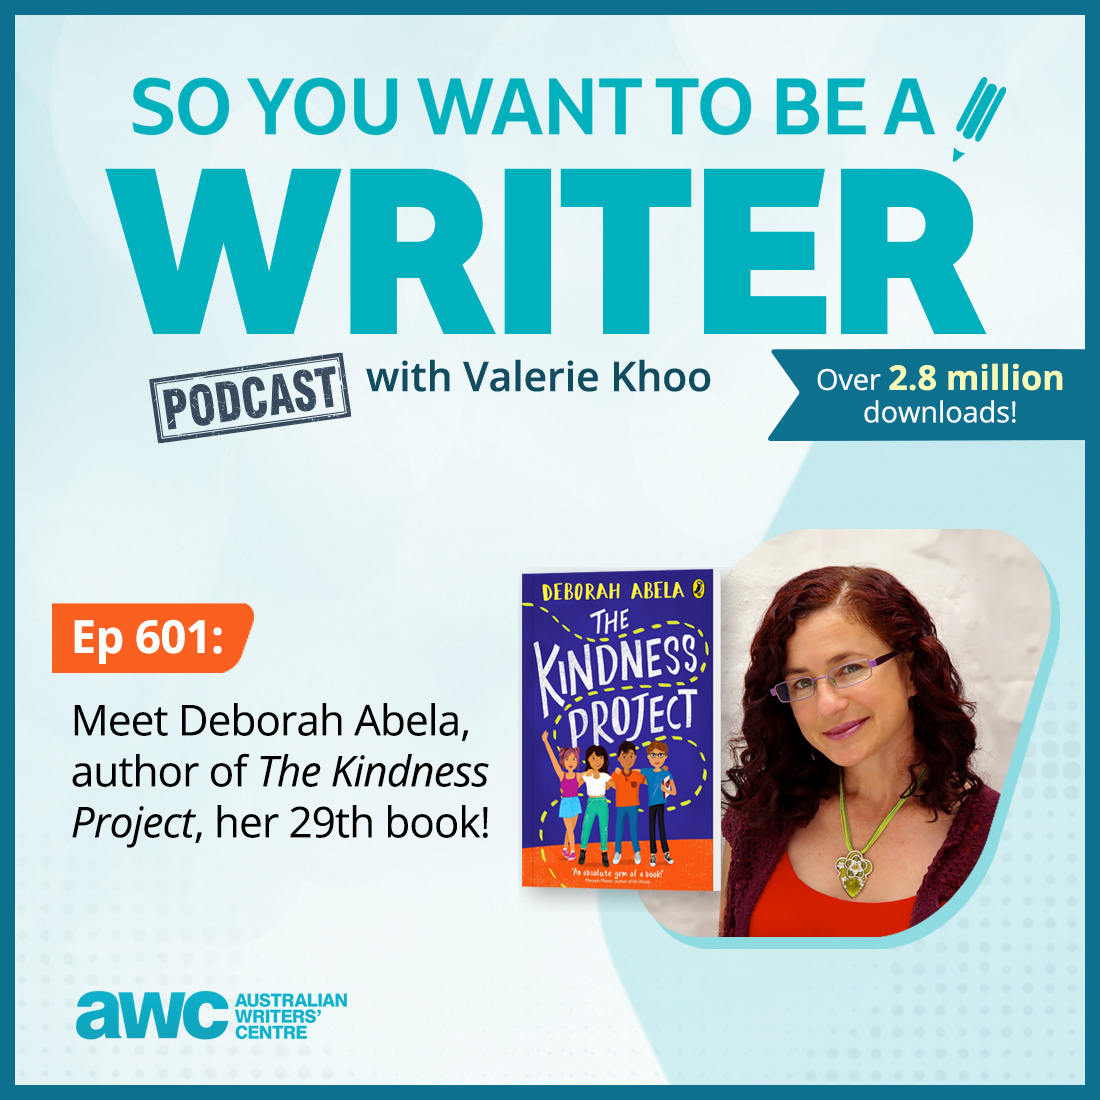 Meet Deborah Abela (@DeborahAbela), author of ‘The Kindness Project’, her 29th book! Listen to the latest episode of ‘So You Want to be a Writer’ on your favourite podcast app, or follow the link: writerscentre.com.au/blog/ep-601/